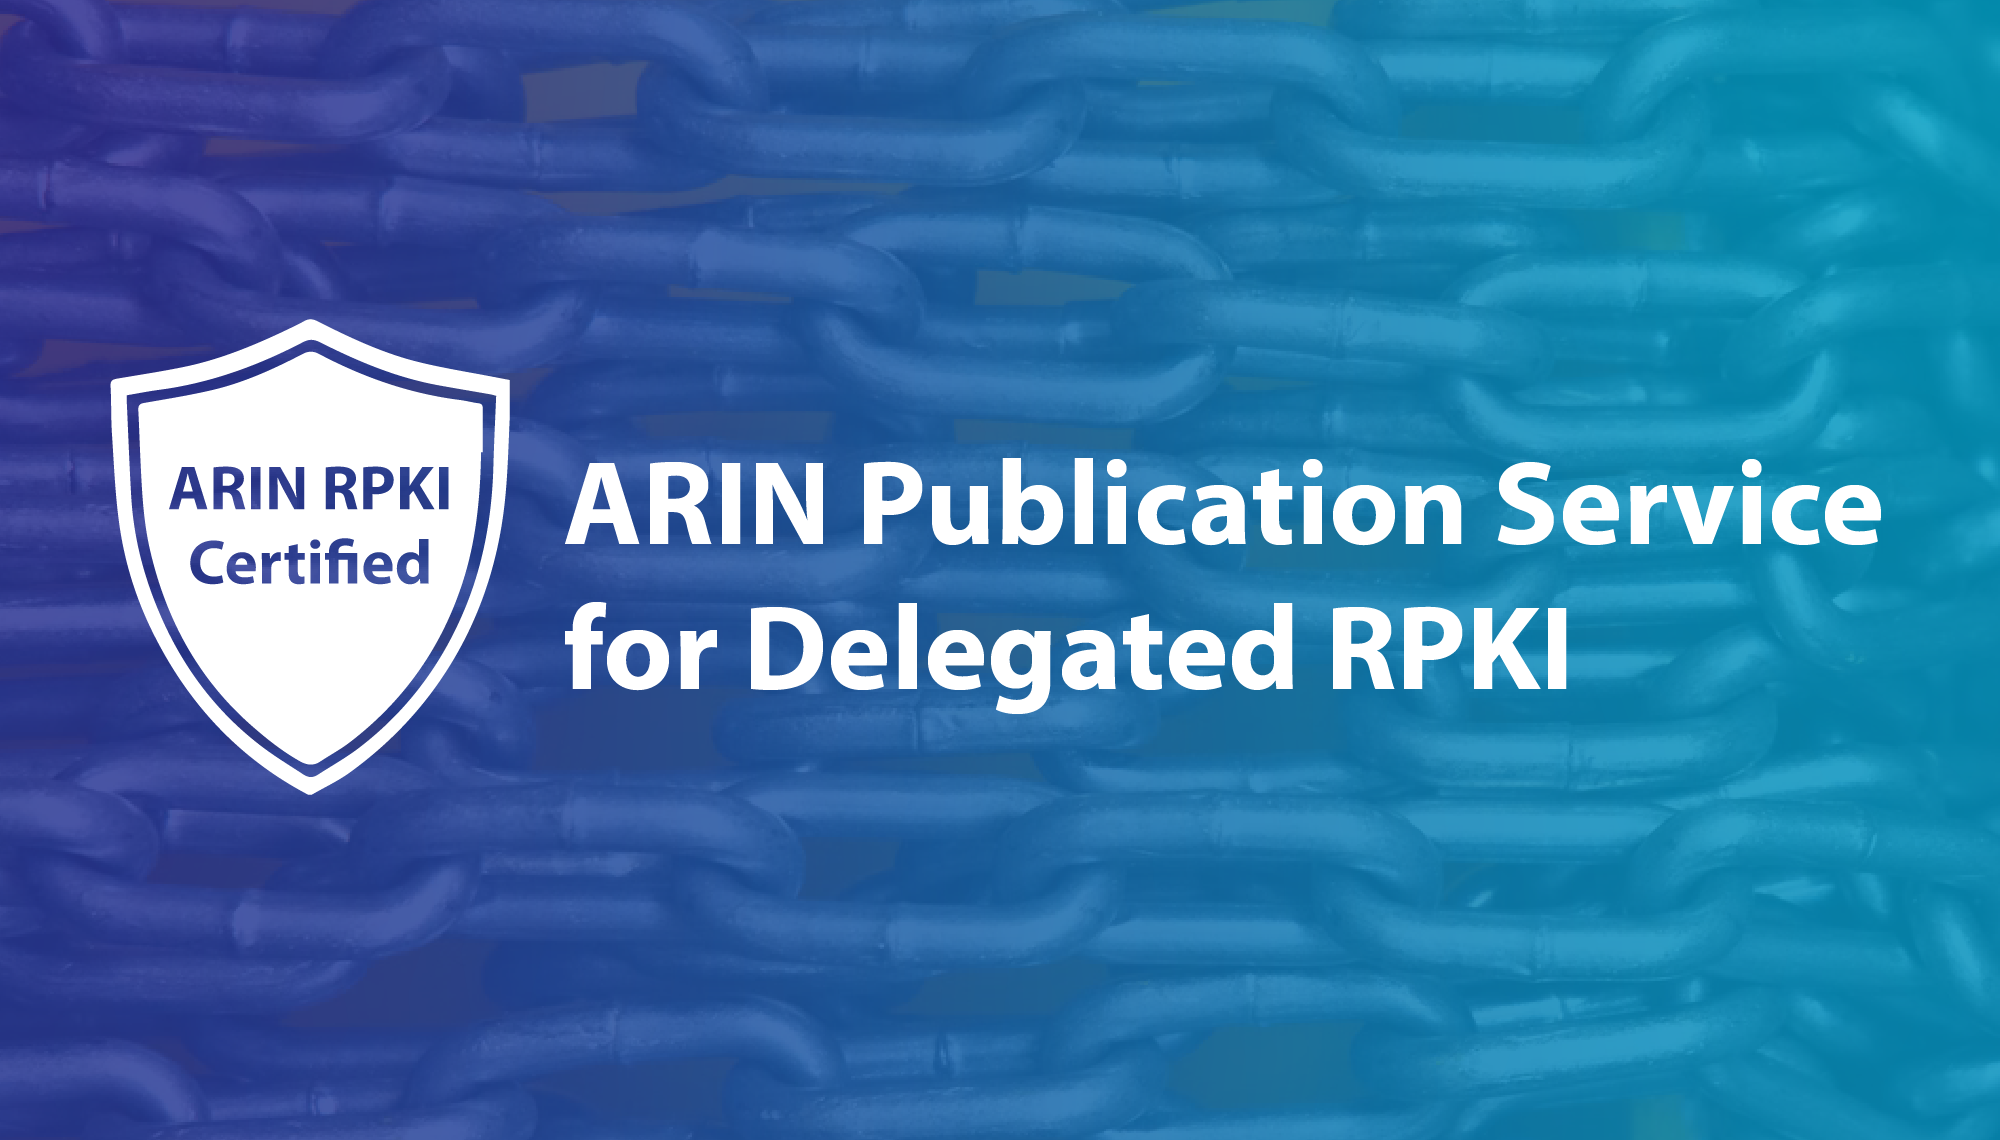 New! ARIN Publication Service for Delegated RPKI 